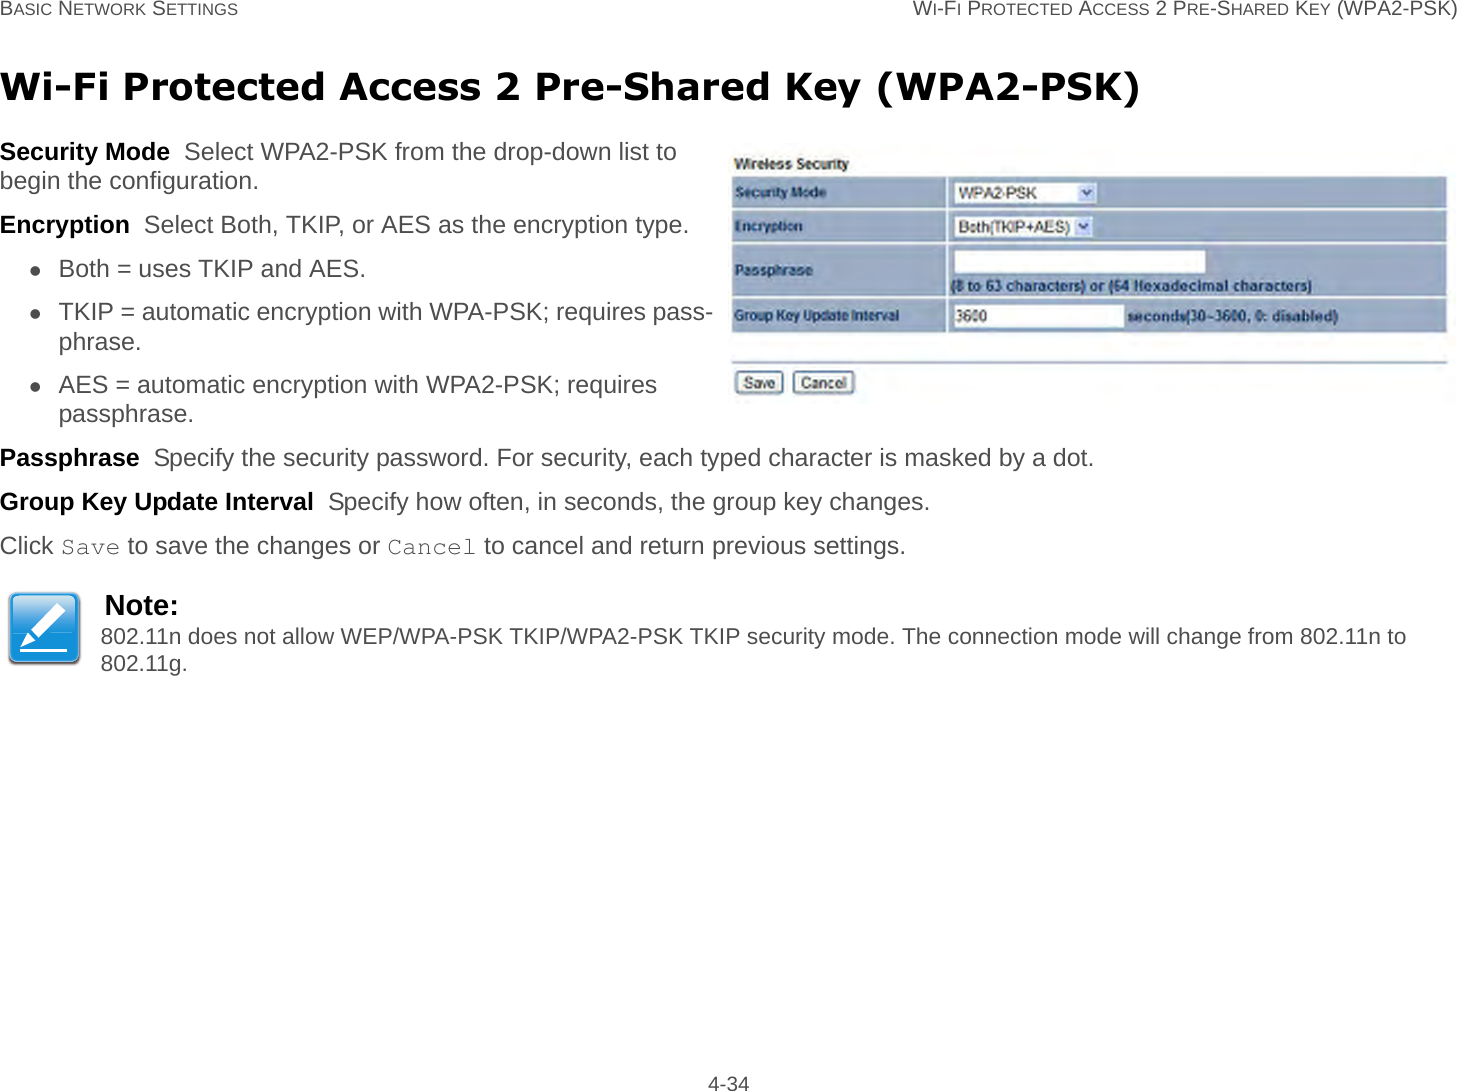 BASIC NETWORK SETTINGS WI-FI PROTECTED ACCESS 2 PRE-SHARED KEY (WPA2-PSK) 4-34Wi-Fi Protected Access 2 Pre-Shared Key (WPA2-PSK)Security Mode  Select WPA2-PSK from the drop-down list to begin the configuration.Encryption  Select Both, TKIP, or AES as the encryption type.Both = uses TKIP and AES.TKIP = automatic encryption with WPA-PSK; requires pass-phrase.AES = automatic encryption with WPA2-PSK; requires passphrase.Passphrase  Specify the security password. For security, each typed character is masked by a dot.Group Key Update Interval  Specify how often, in seconds, the group key changes.Click Save to save the changes or Cancel to cancel and return previous settings.Note:802.11n does not allow WEP/WPA-PSK TKIP/WPA2-PSK TKIP security mode. The connection mode will change from 802.11n to 802.11g.